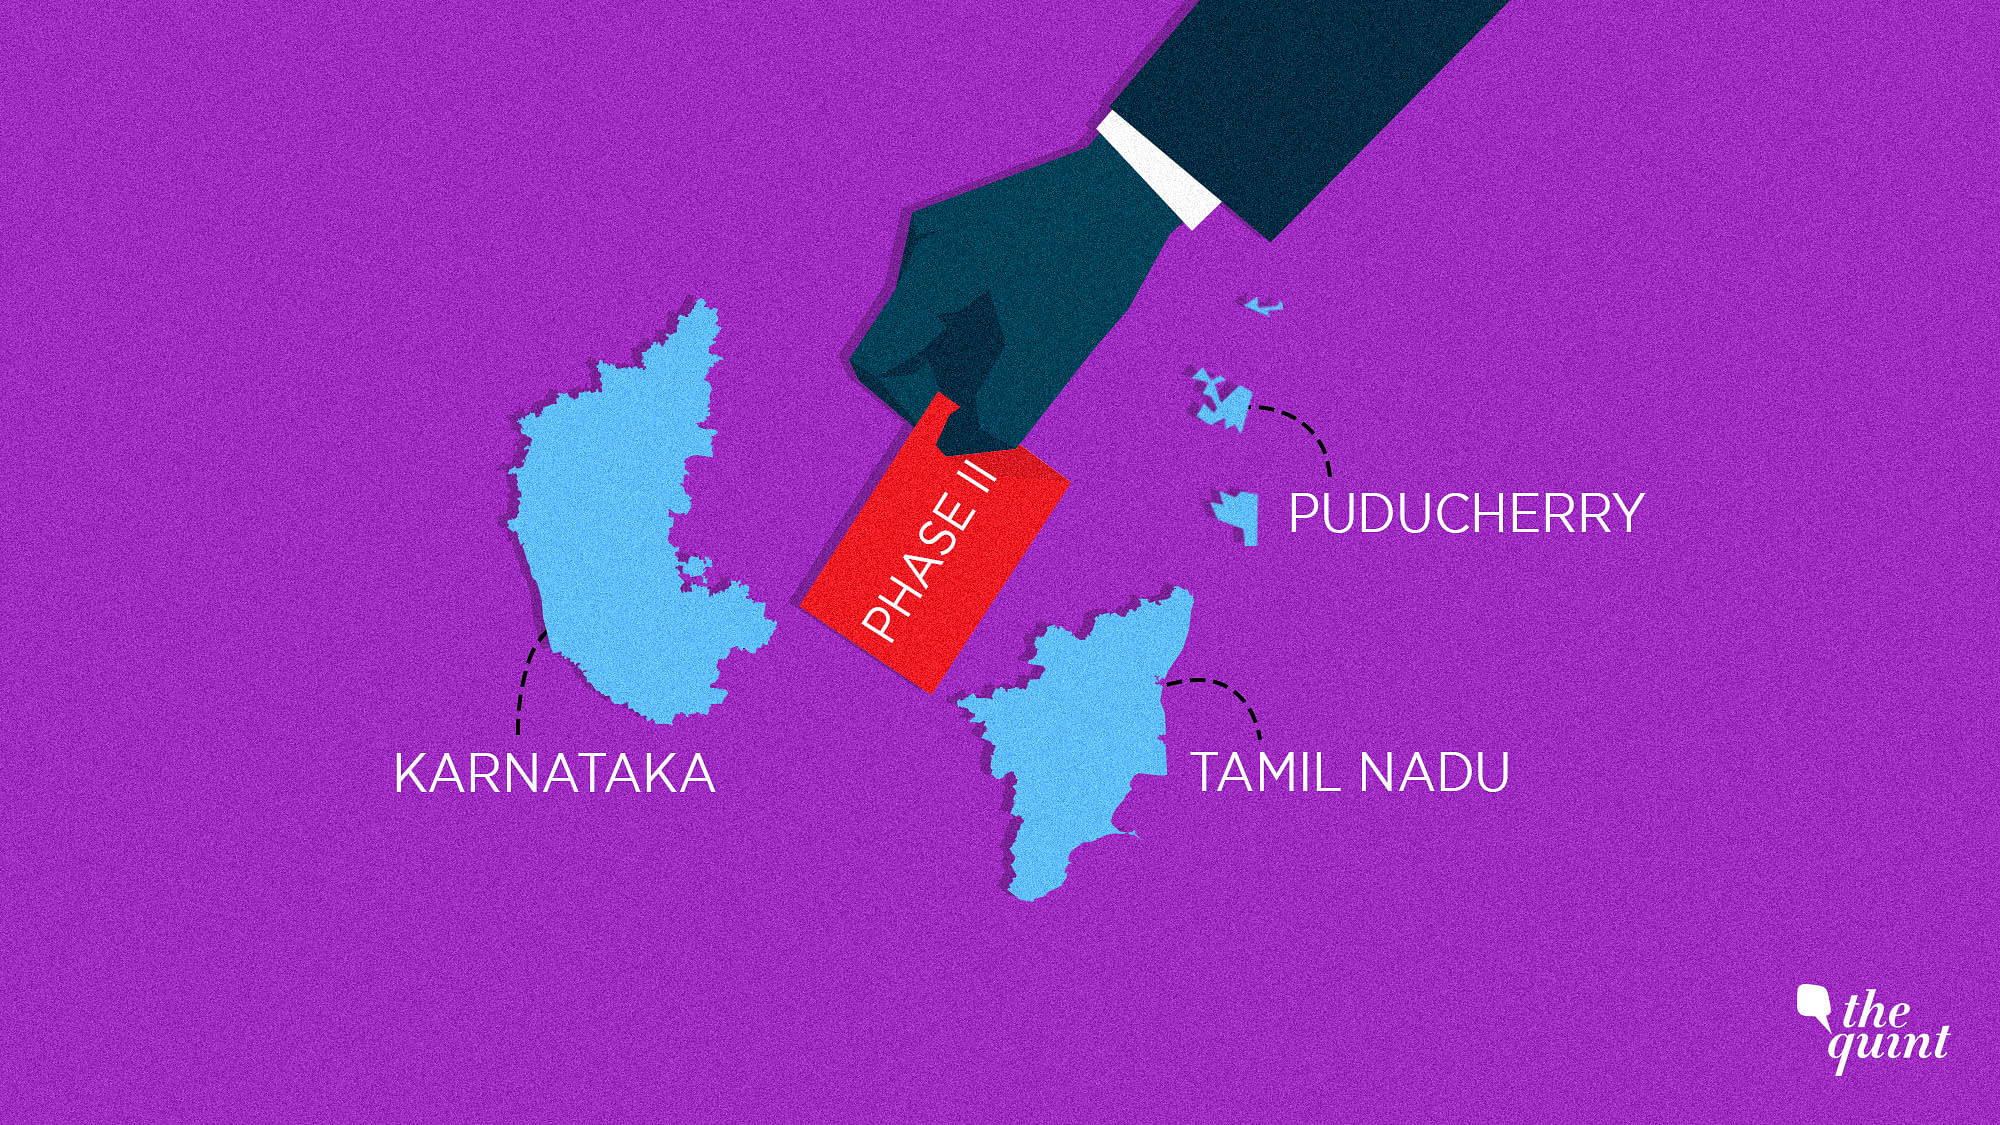 38 seats in Tamil Nadu, 14 constituencies in Karnataka and the only Puducherry seat will cast their ballots.